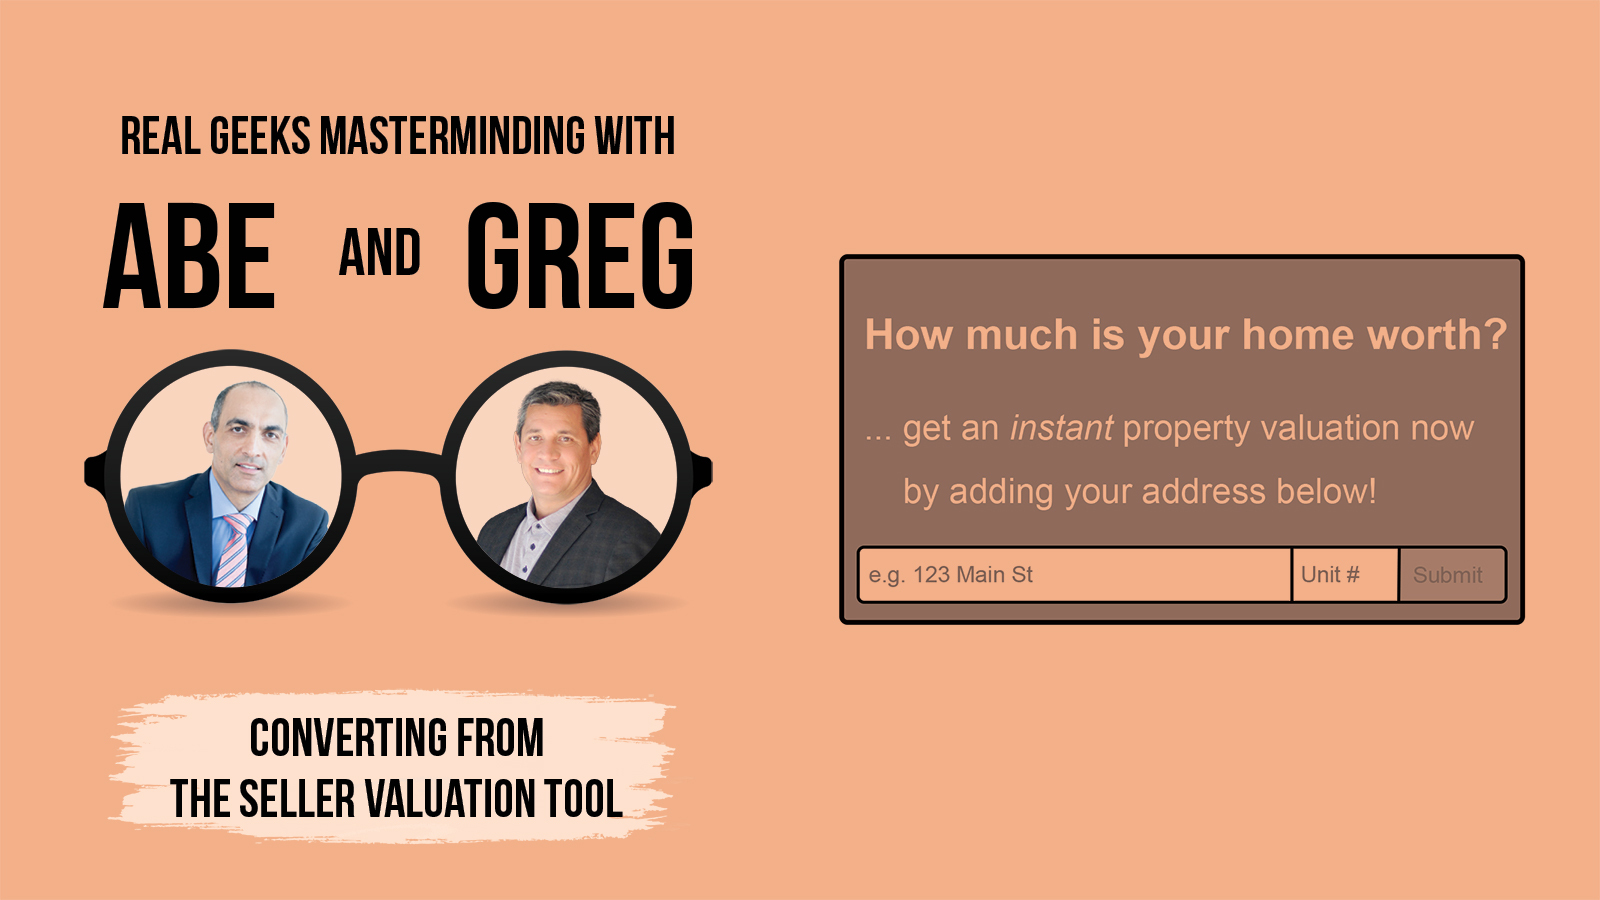 Converting From The Seller Valuation Tool